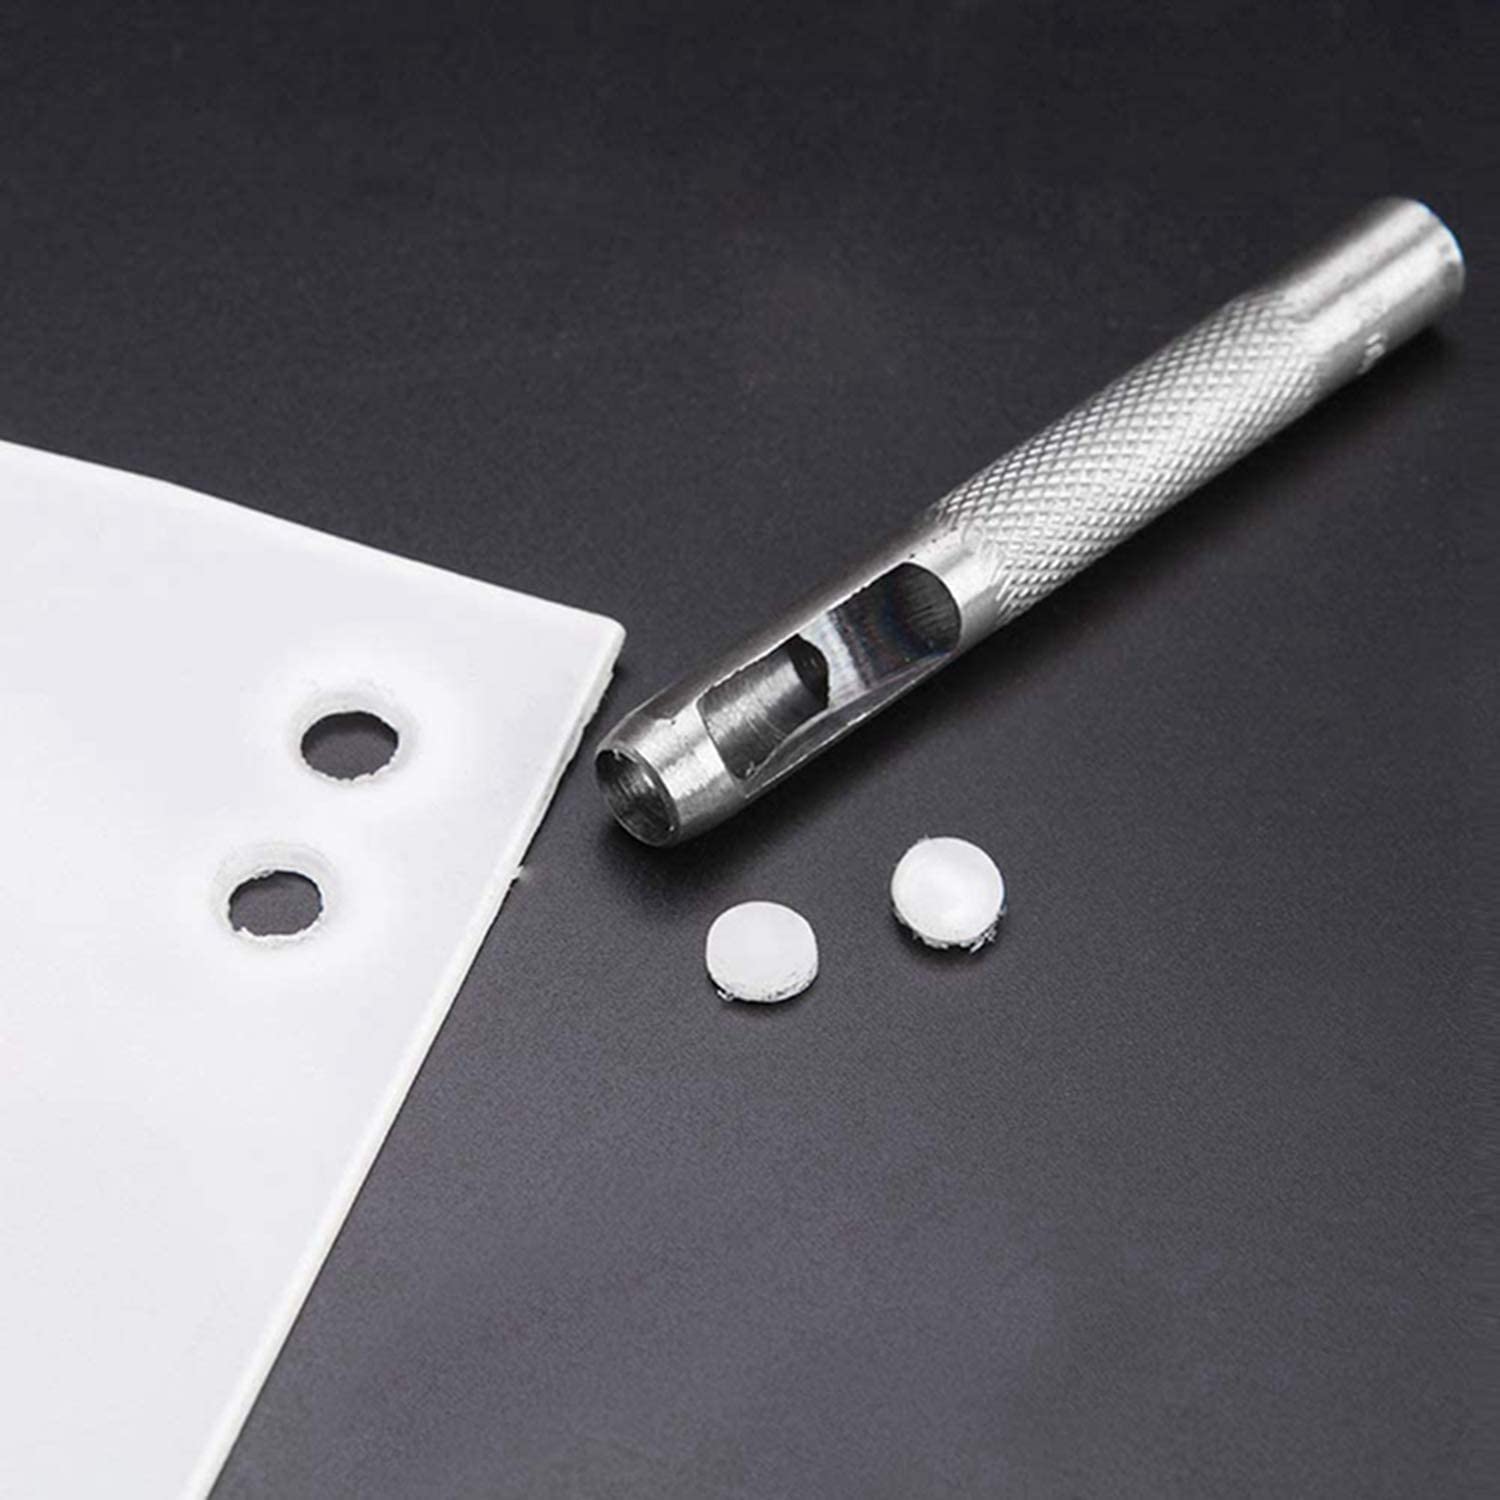 Hollow Hole Punch Set Carbon Steel 1/8 to 5/16 for Leather Fabric